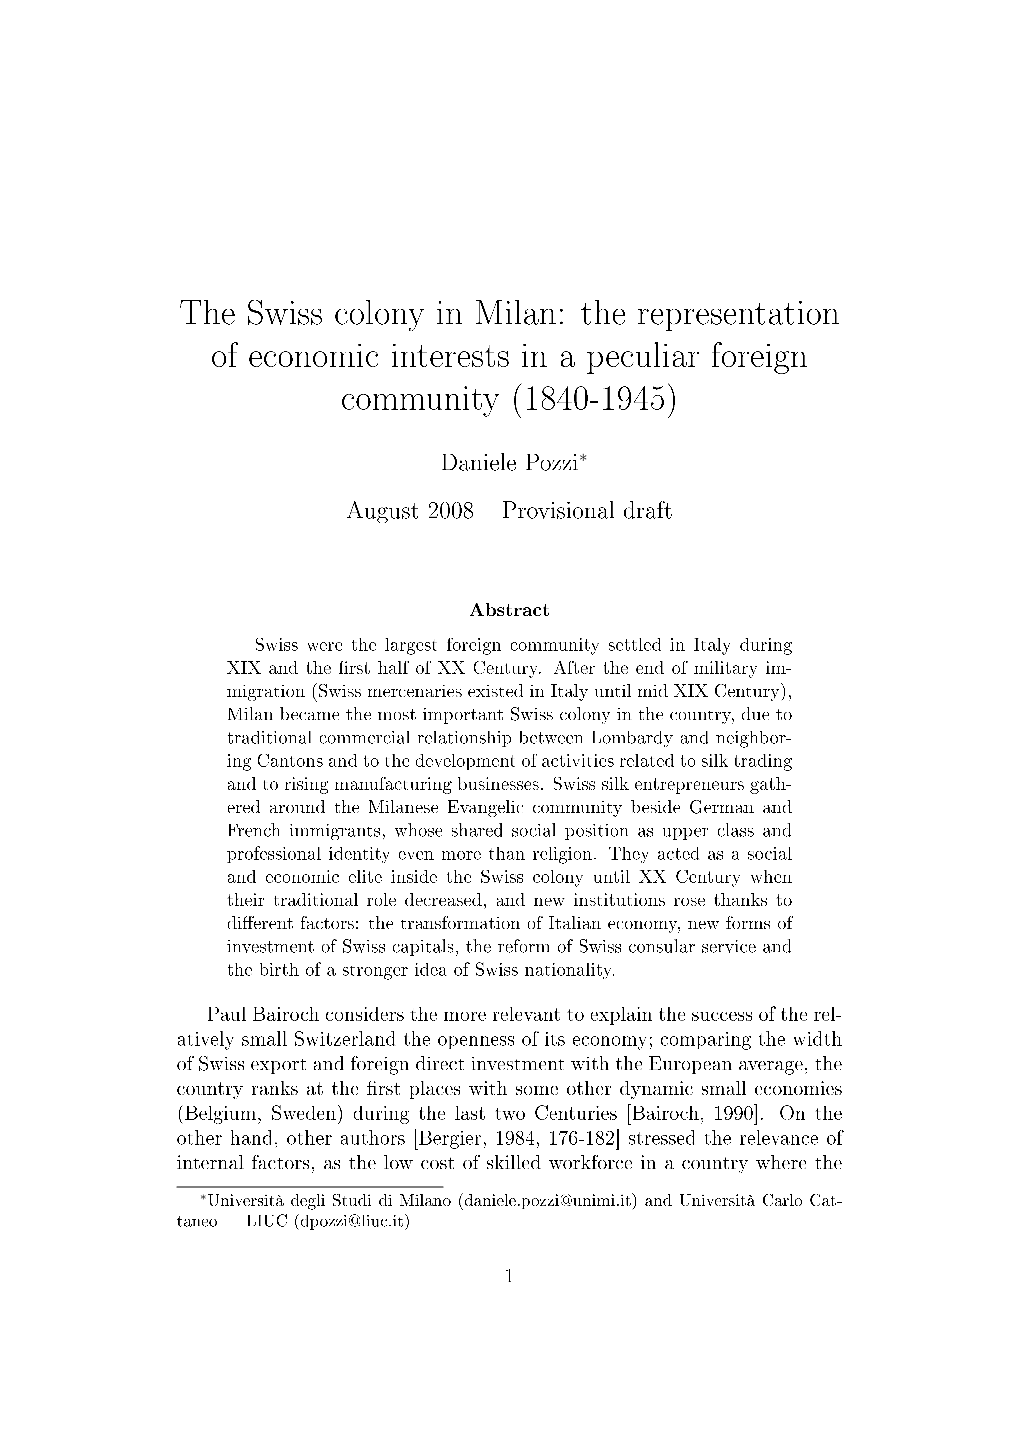 The Swiss Colony in Milan: the Representation of Economic Interests in a Peculiar Foreign Community (1840-1945)